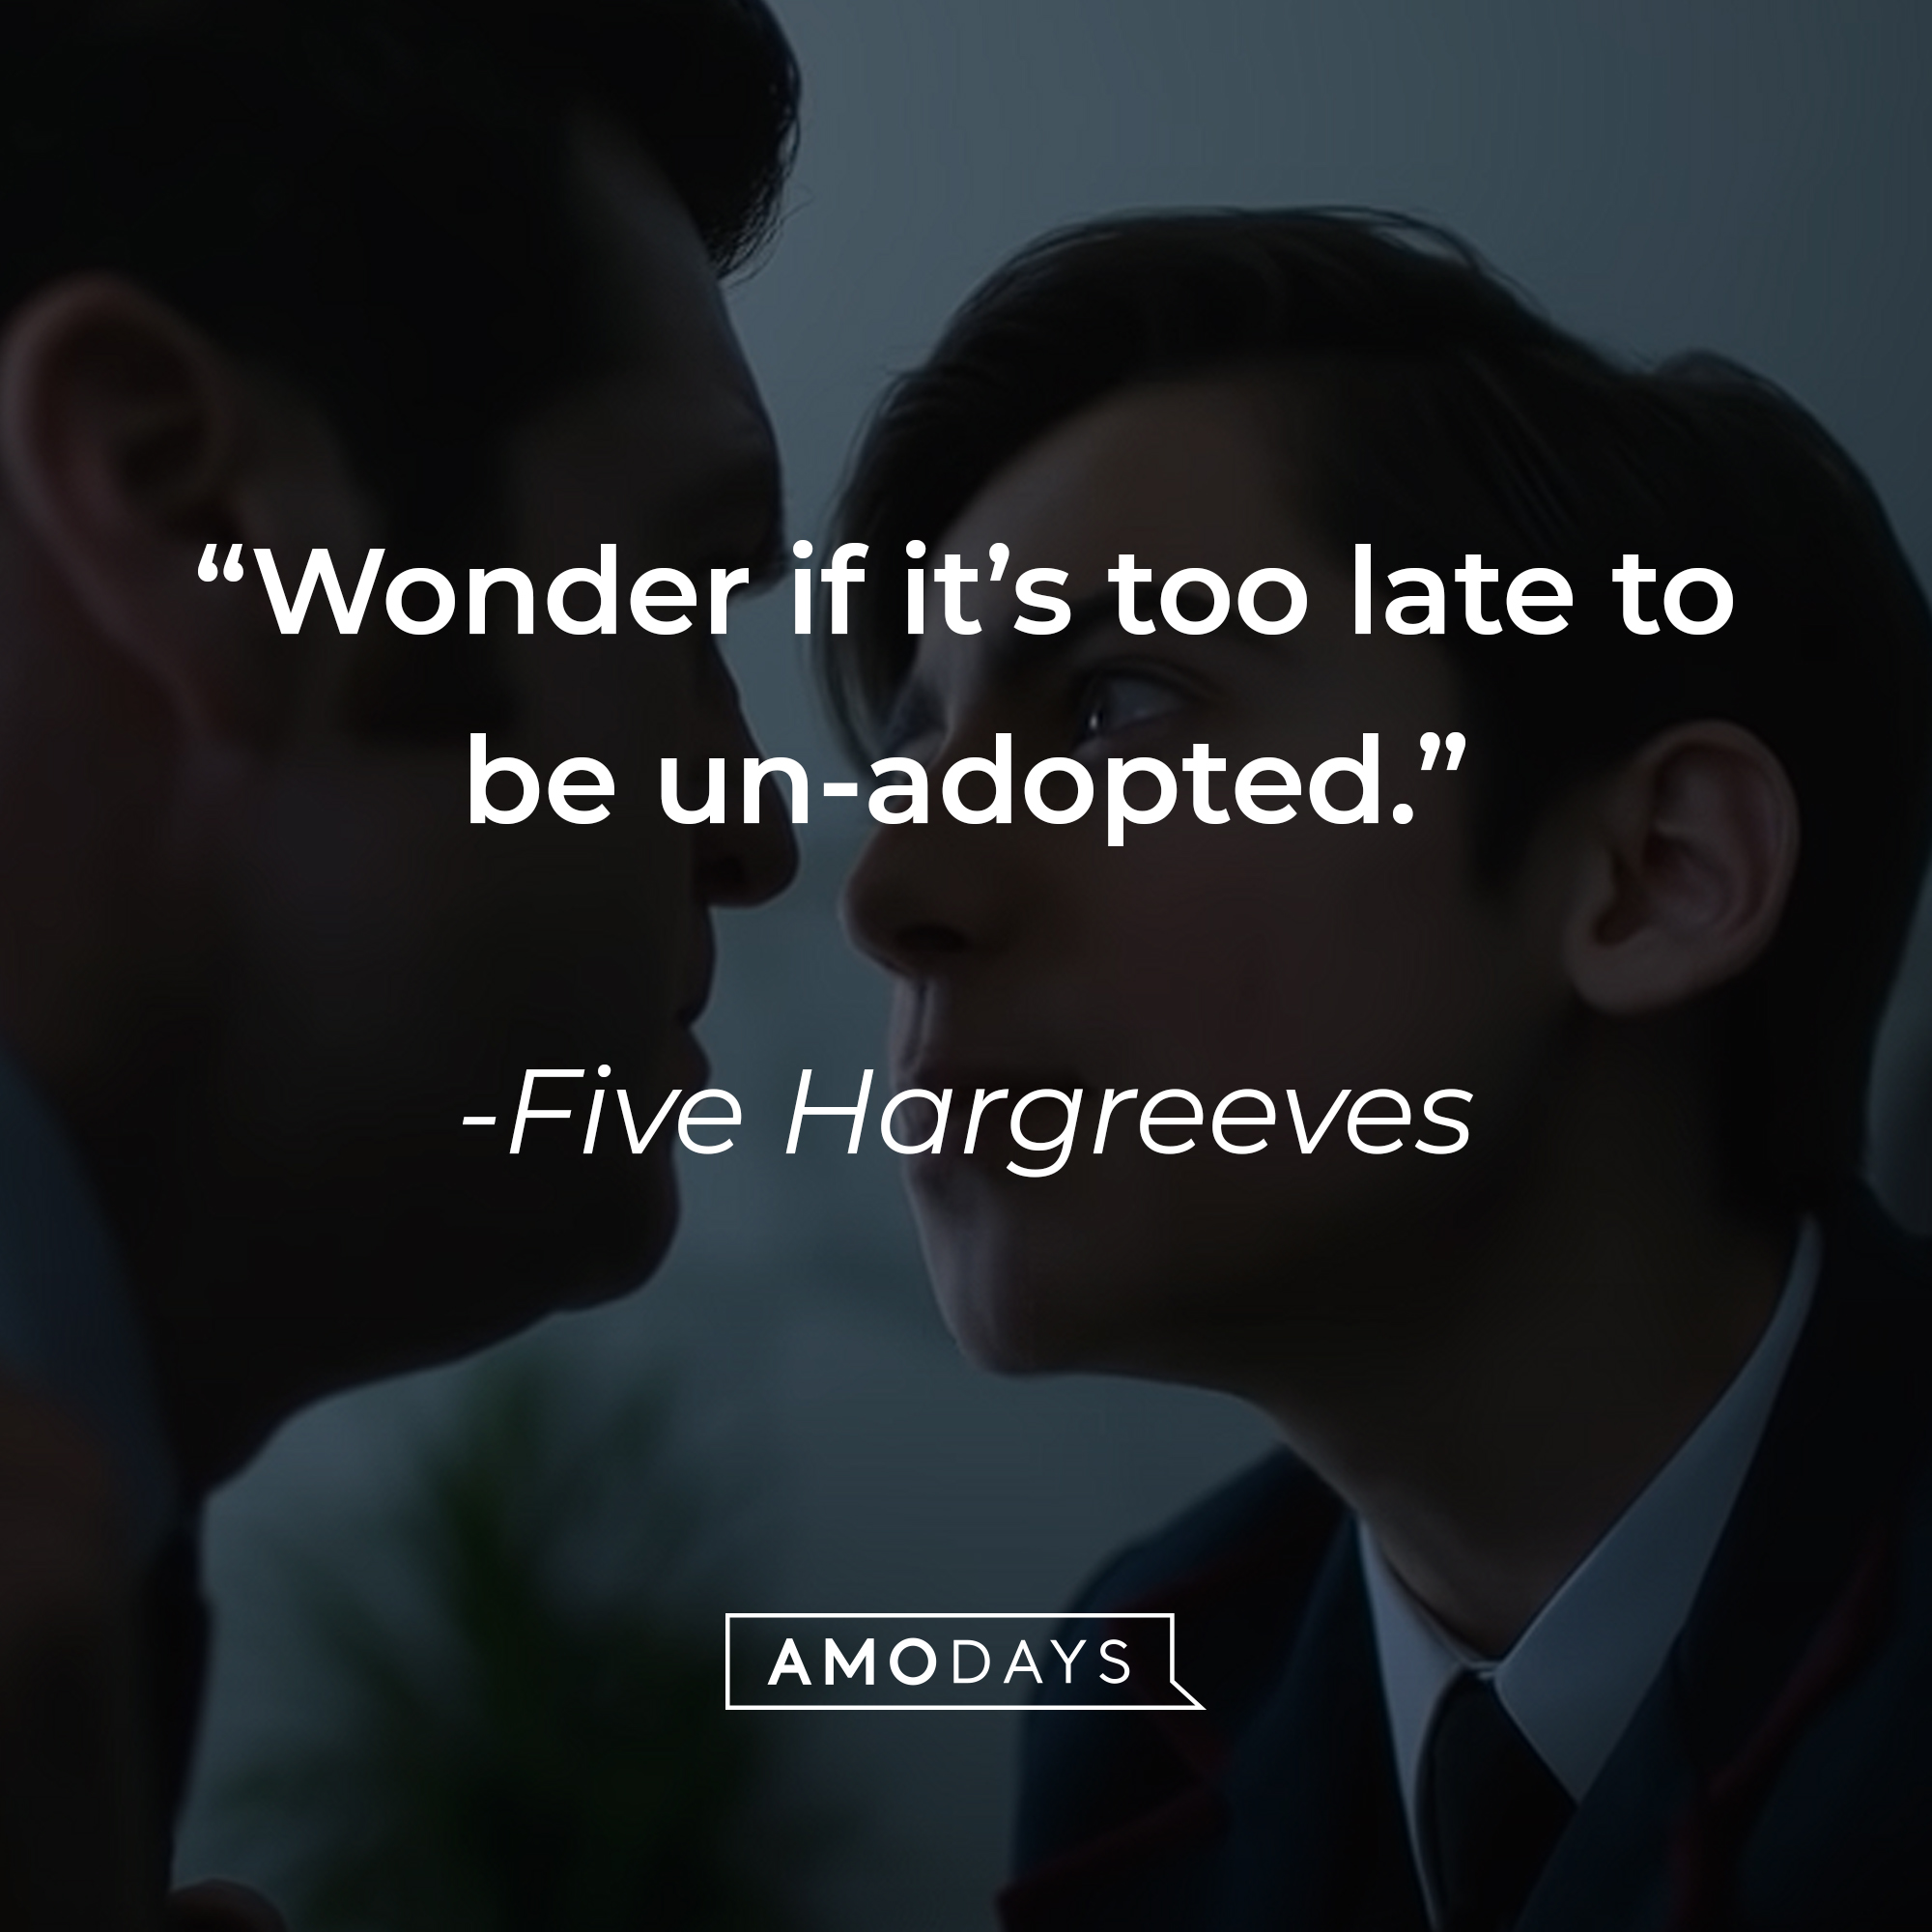 Five Hargreeves’ quote: “Wonder if it’s too late to be un-adopted.” | Source: youtube.com/Netflix